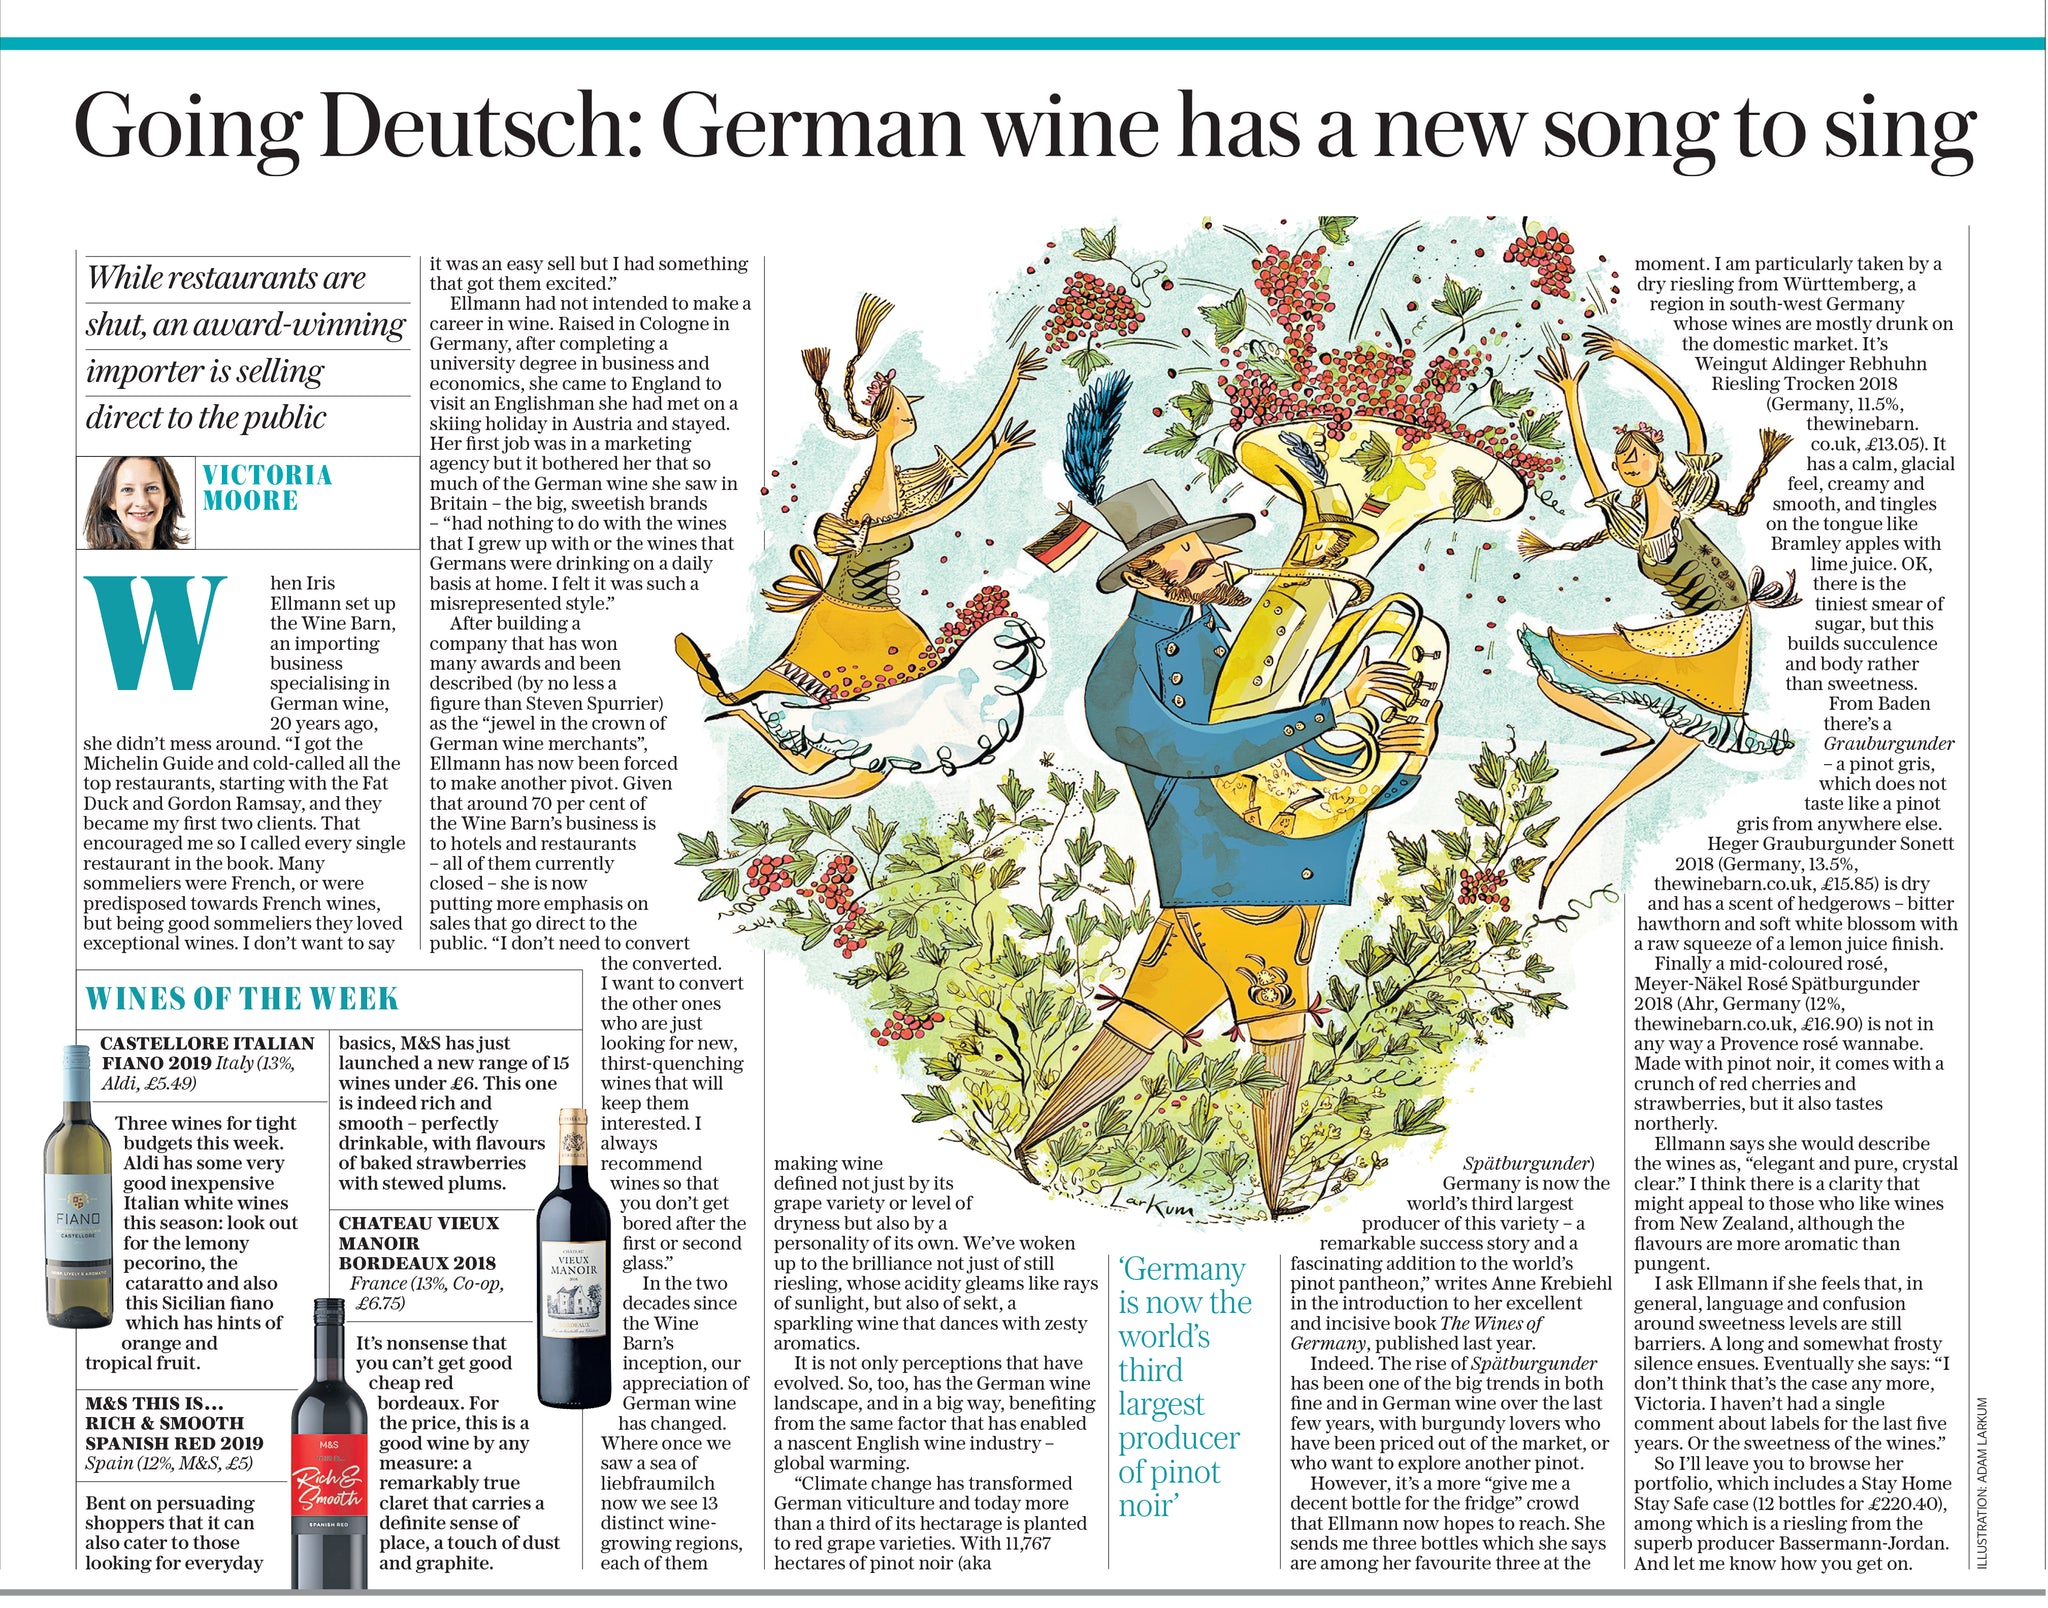 The WineBarn feature in The Telegraph newspaper